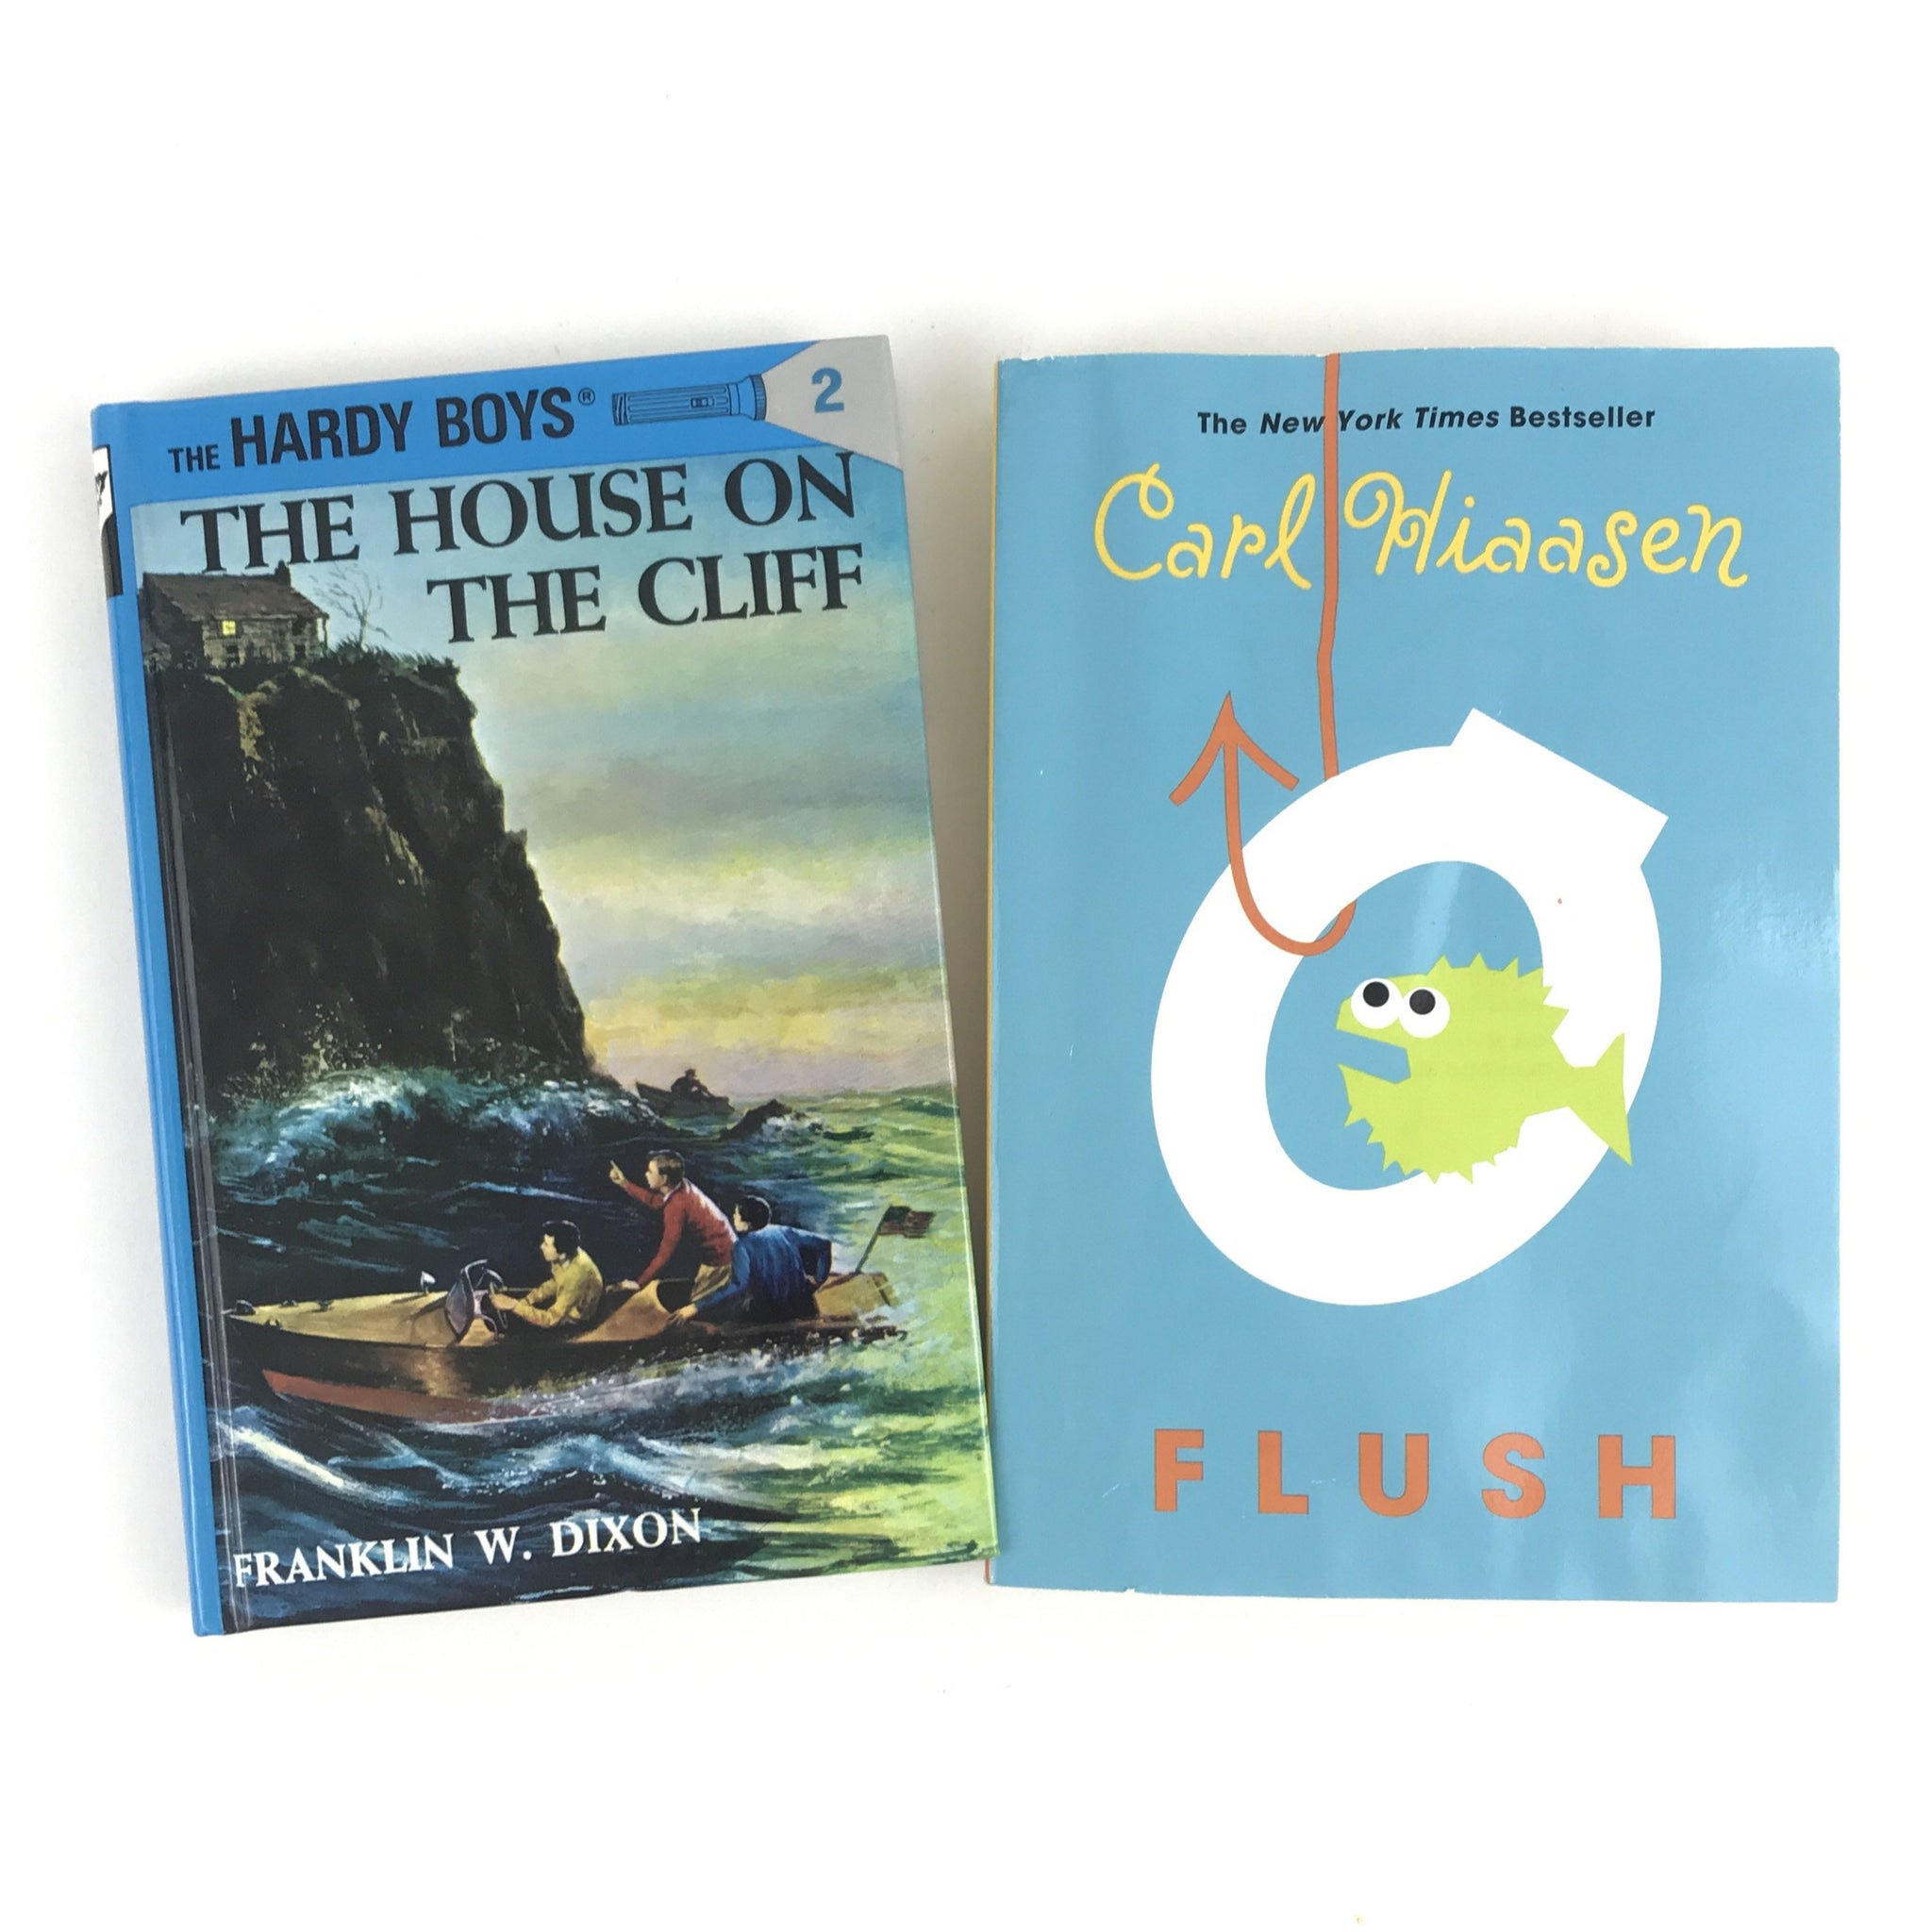 The Hardy Boys The House On The Cliff by Franklin Dixon Plus Flush by Carl Hiaasen